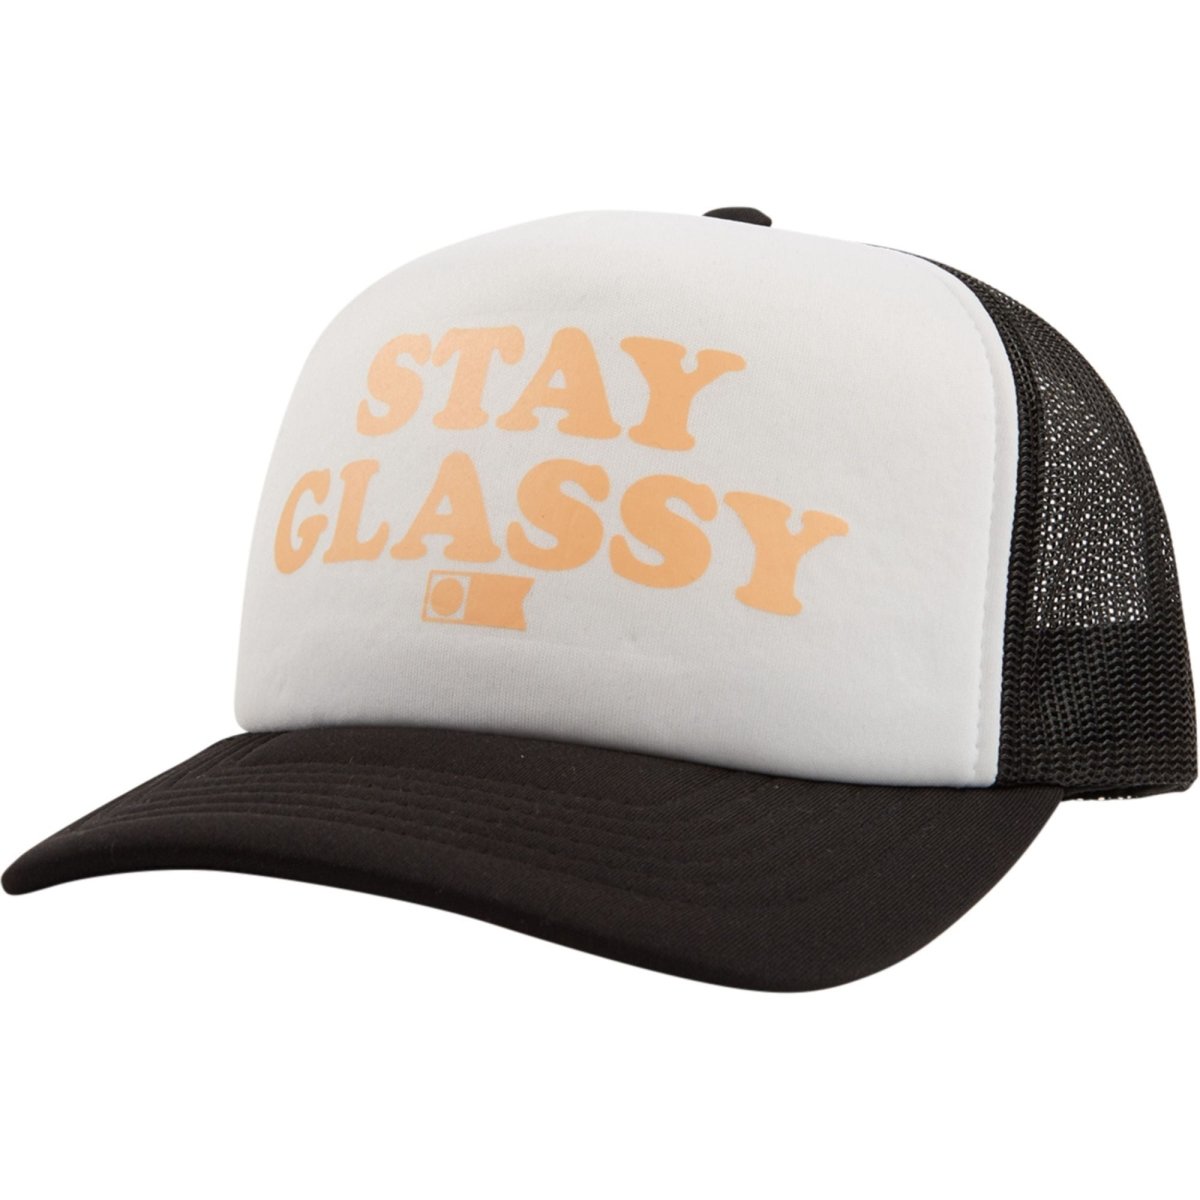 CAP WITH STAY GLASSY blue visor